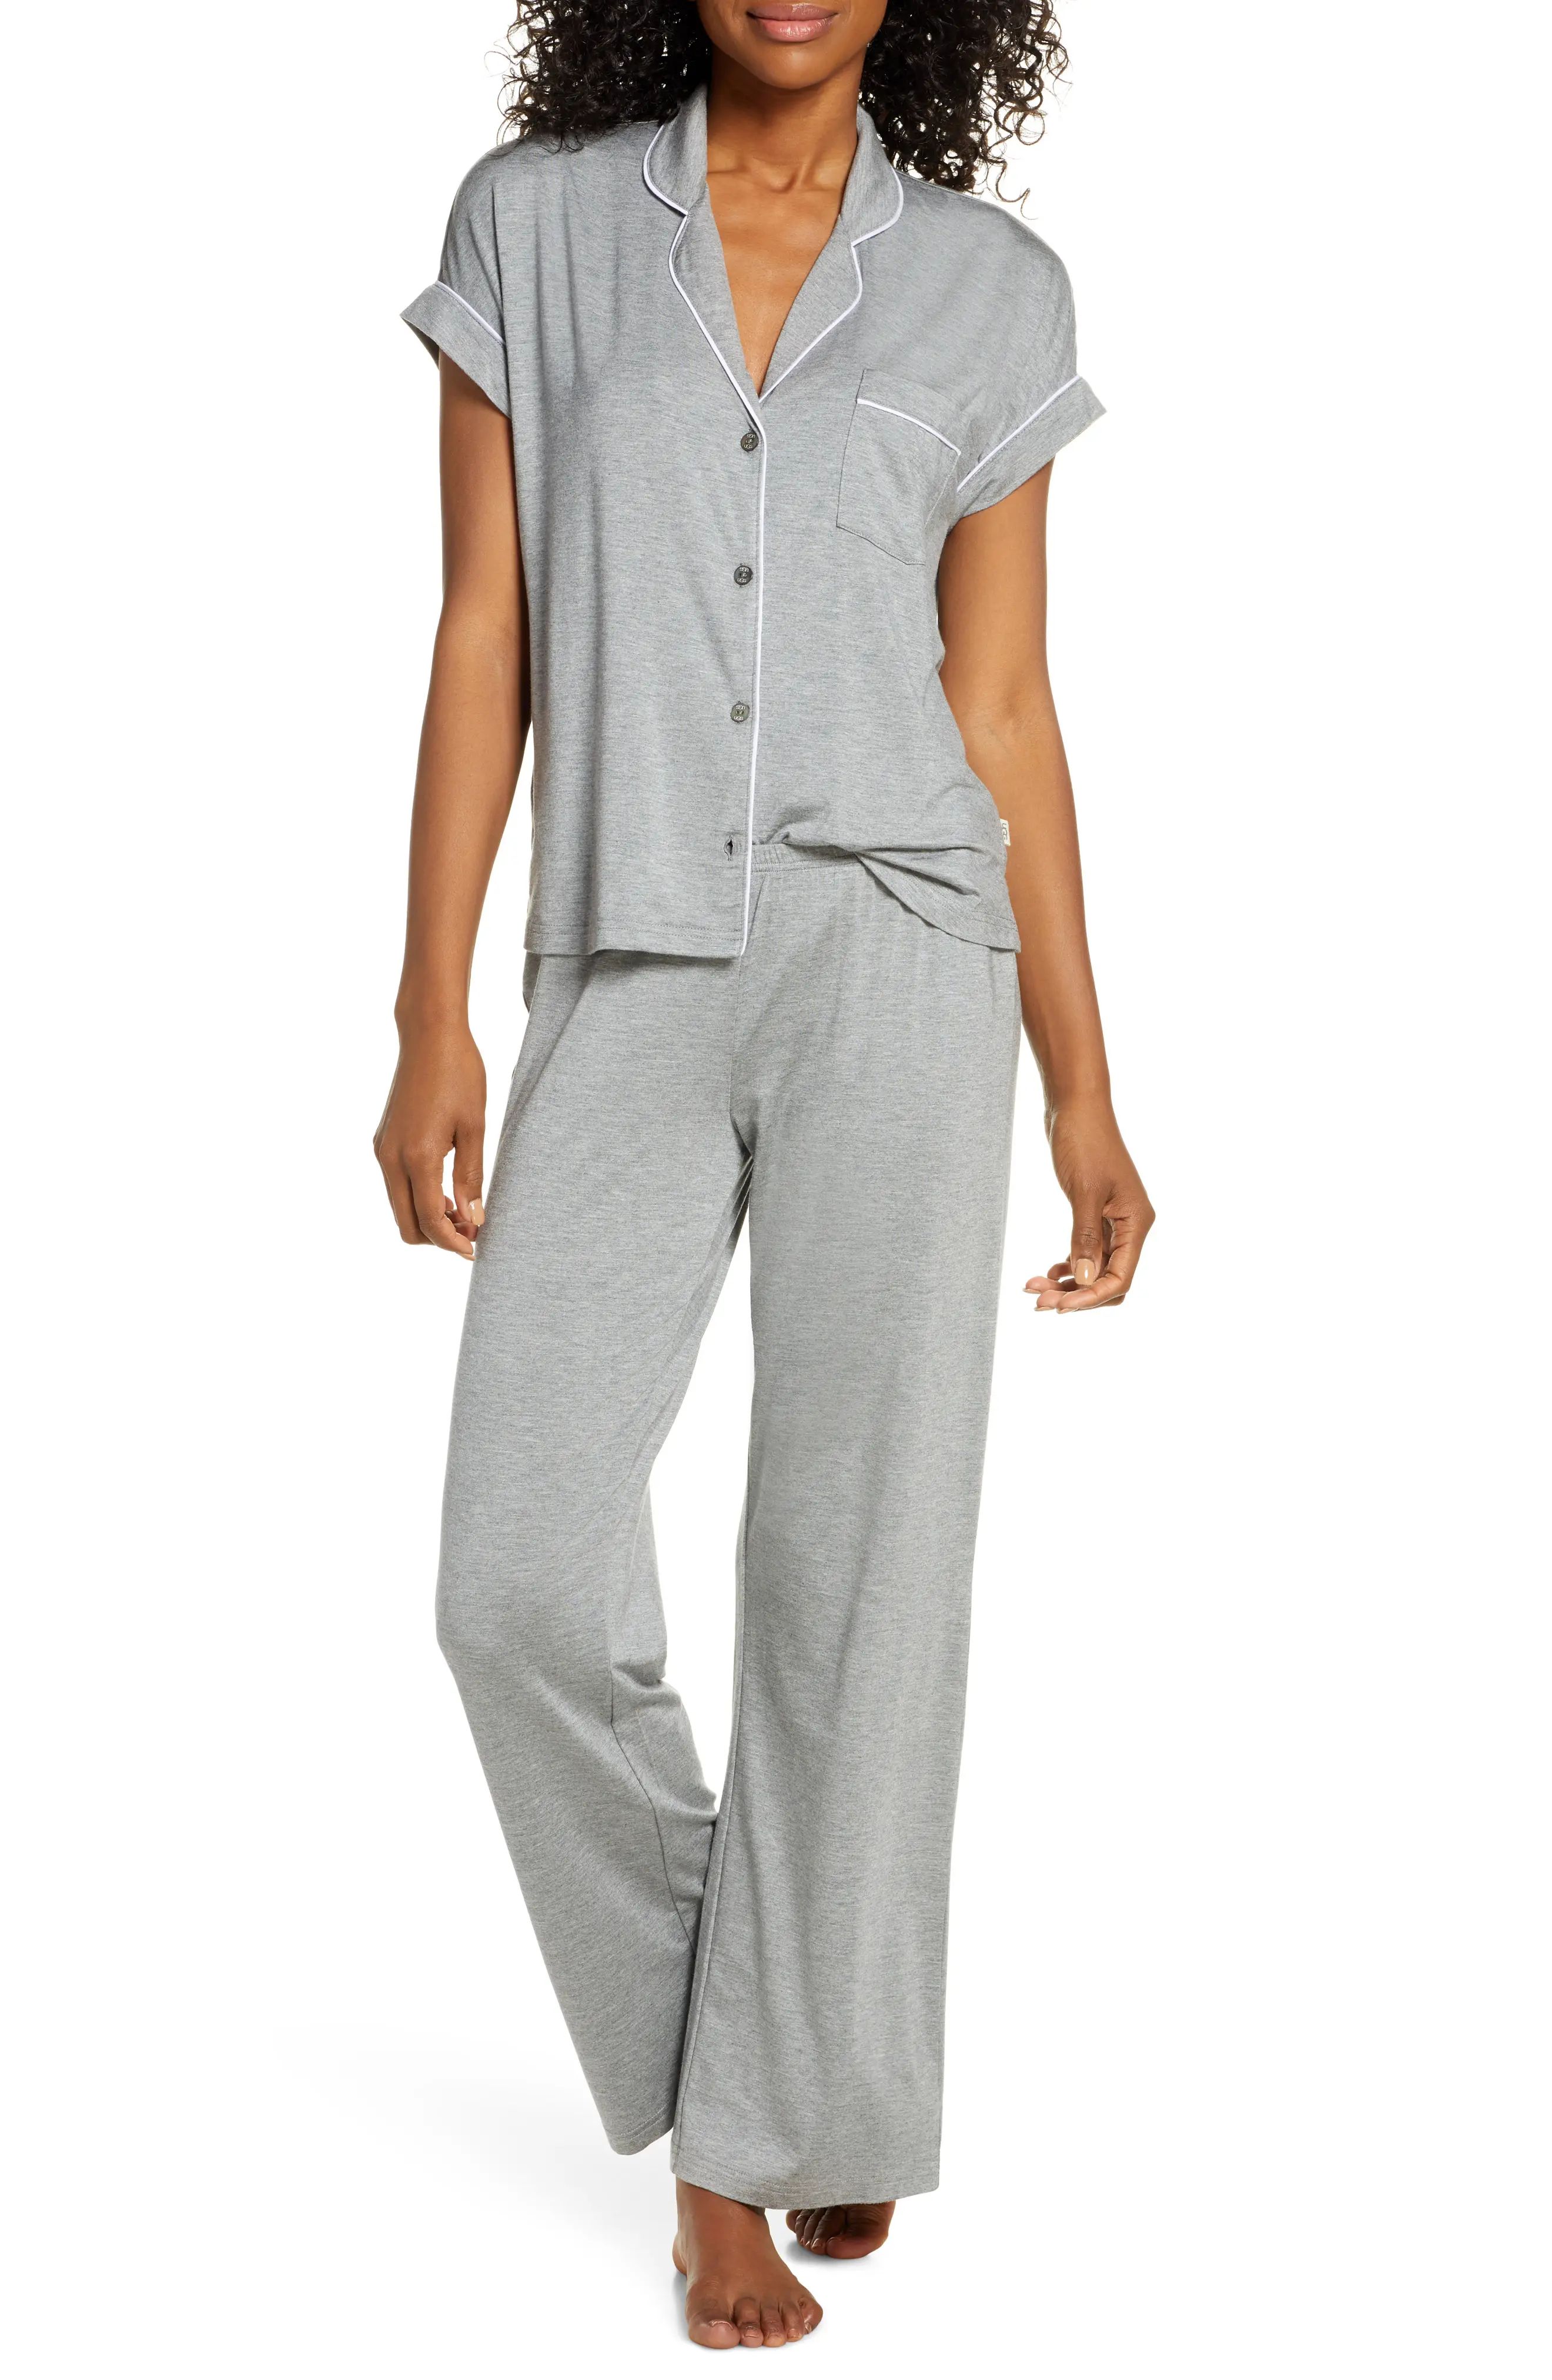 UGG(R) Jersey Pajamas, Size Small in Grey Heather at Nordstrom | Nordstrom